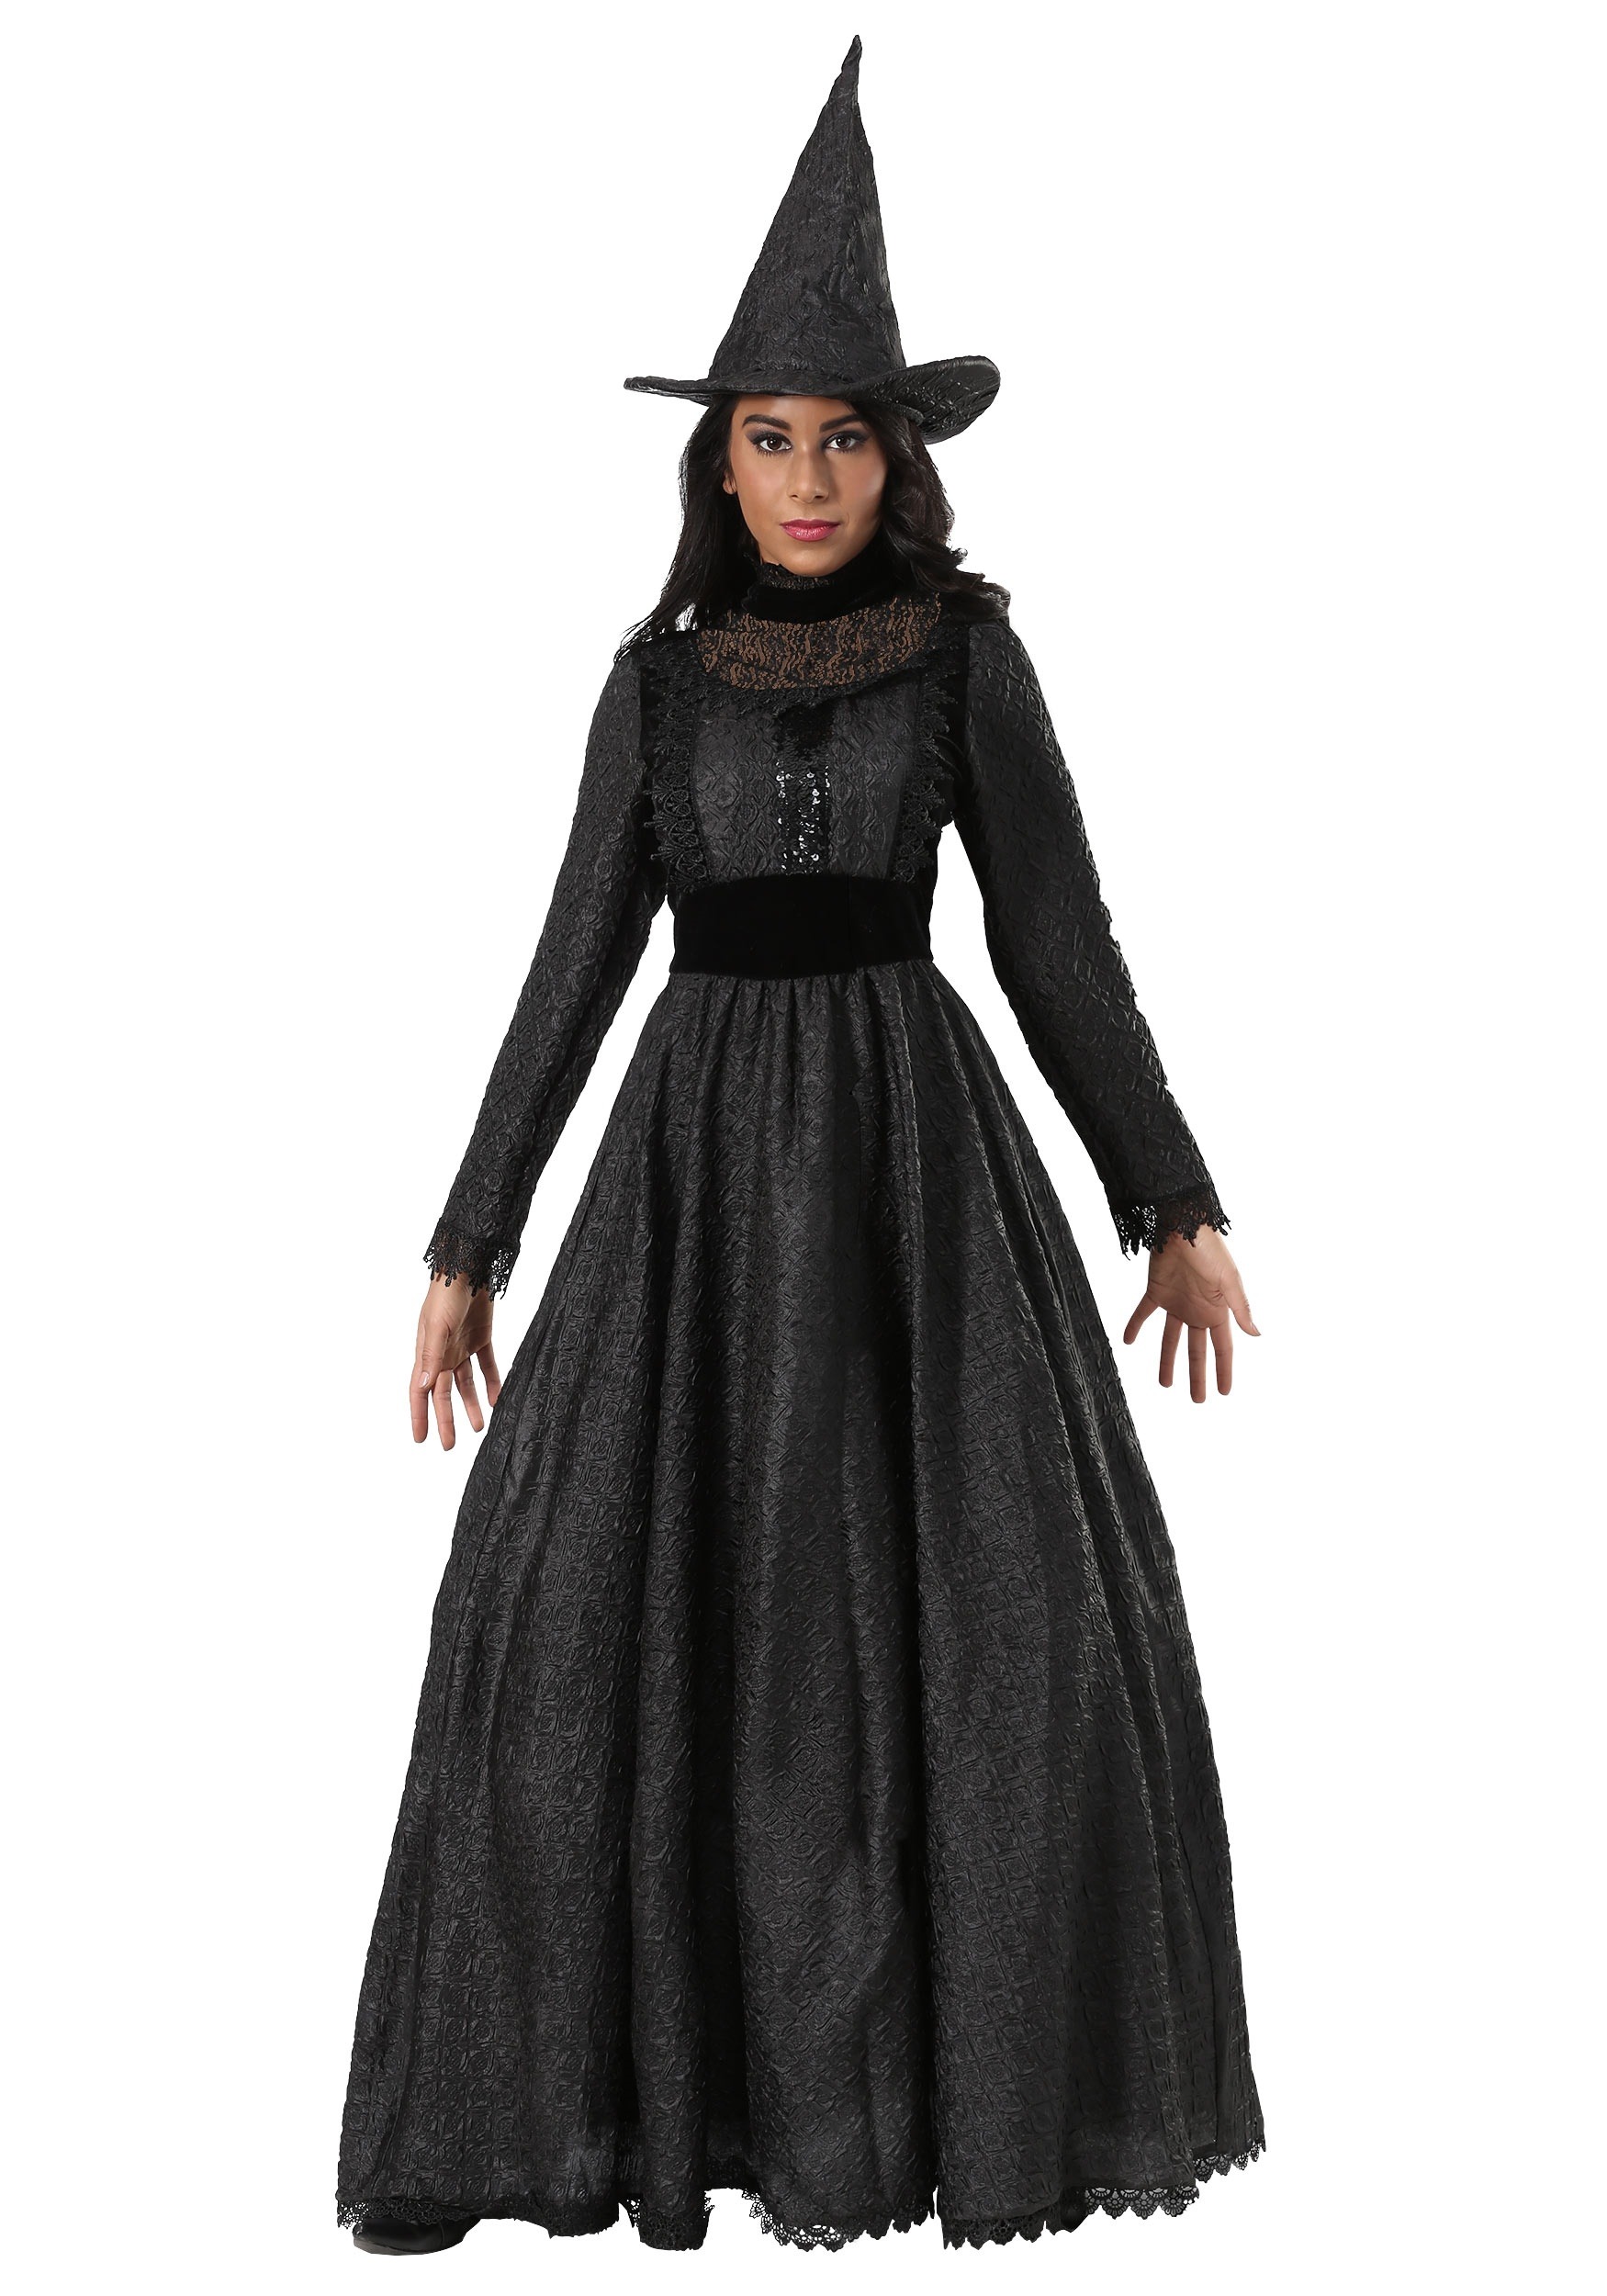 Image of Deluxe Plus Size Dark Witch Costume for Women ID FUN6695PL-4X